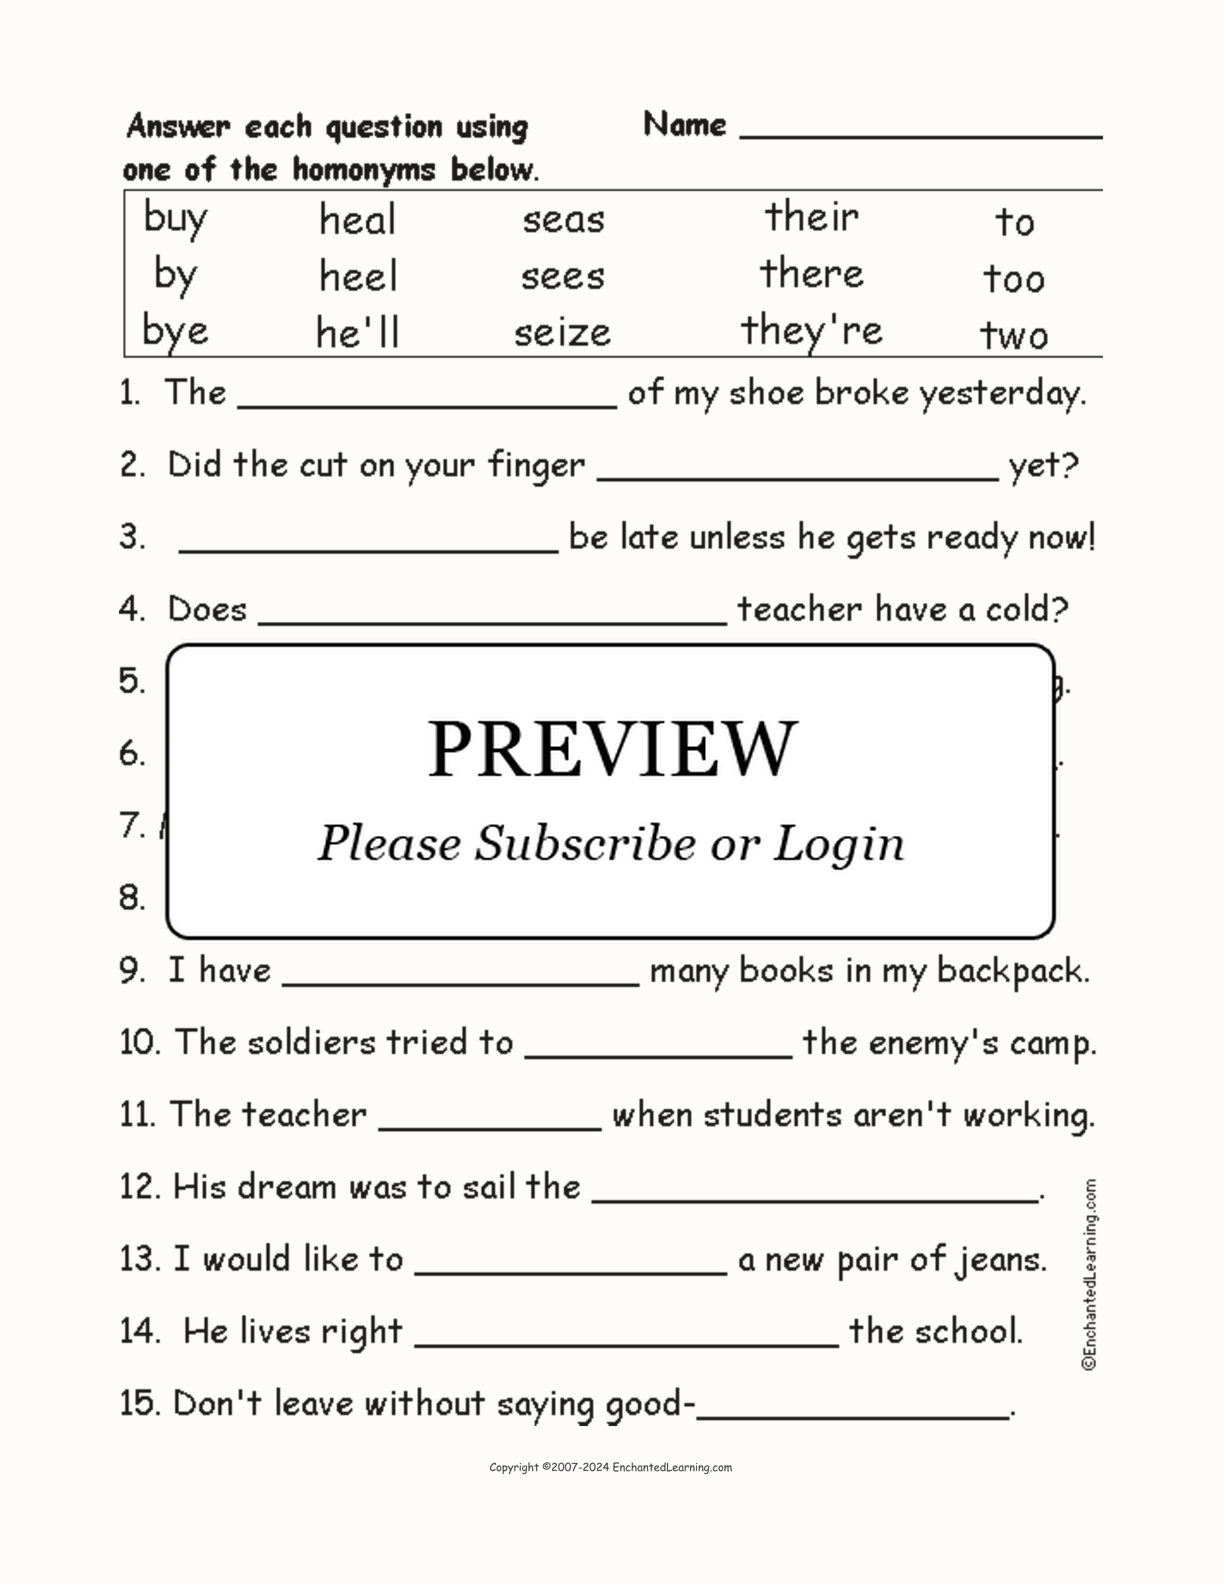 Homonyms Spelling Word Questions #1 interactive worksheet page 1